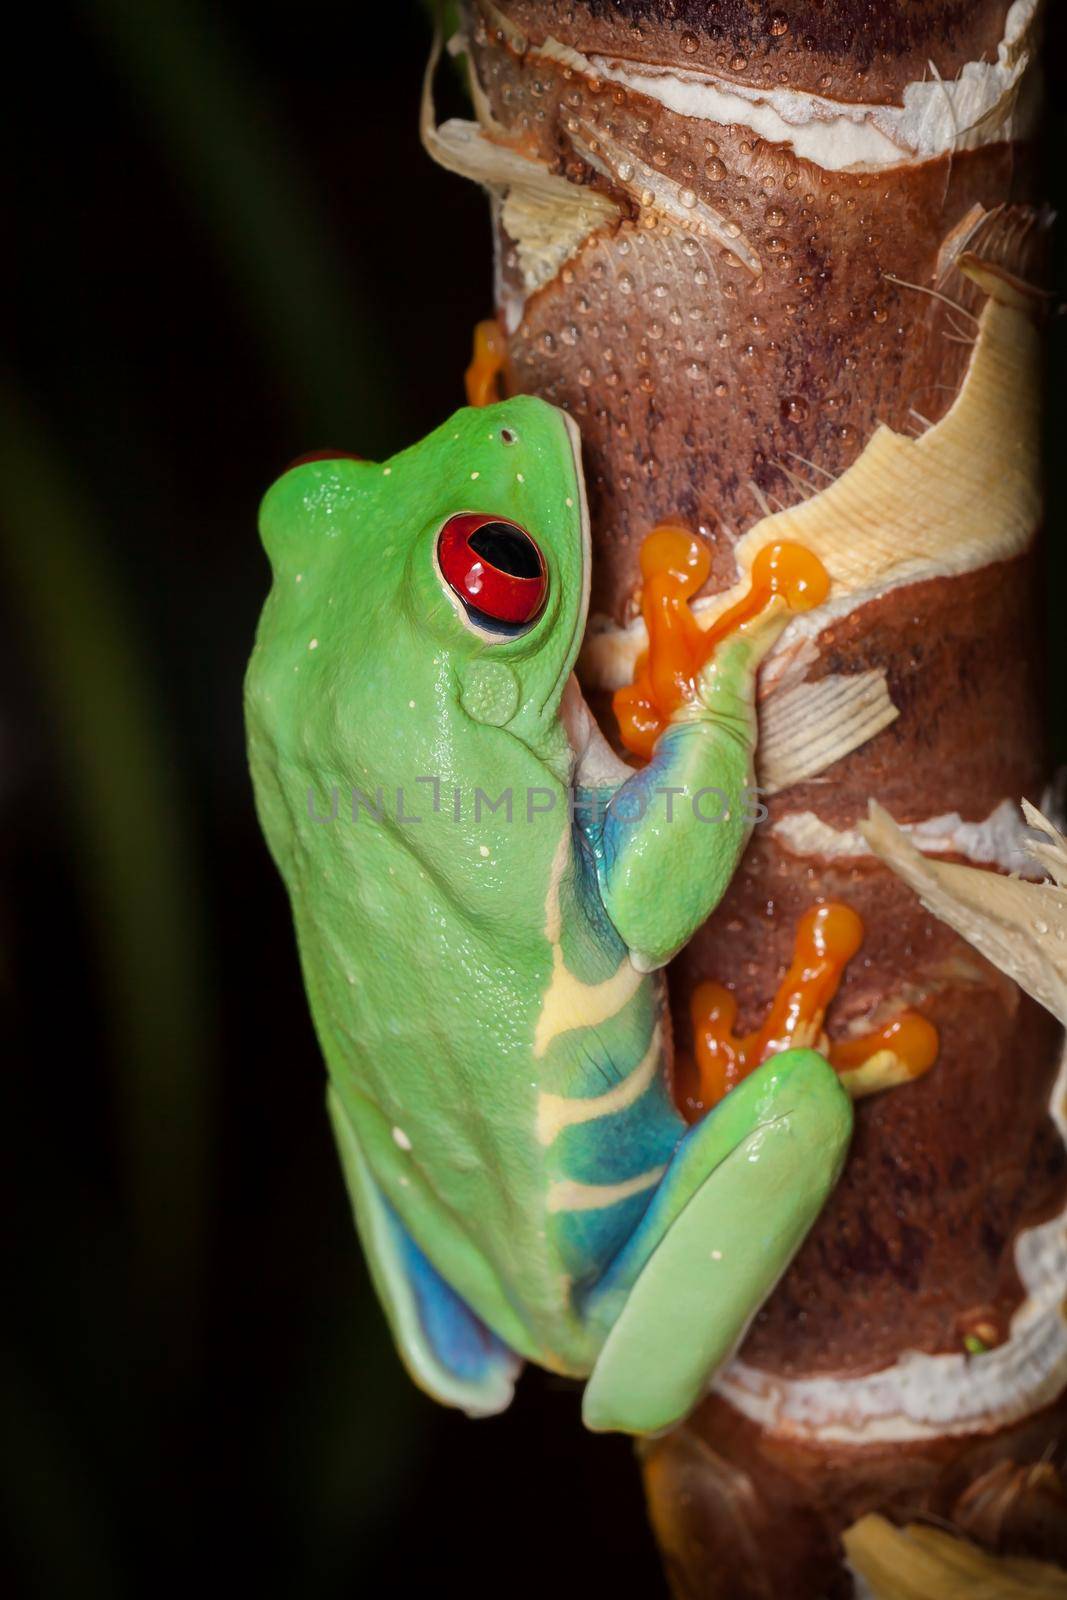 Red-eyed tree frog climbing on the plant stem in the dark background